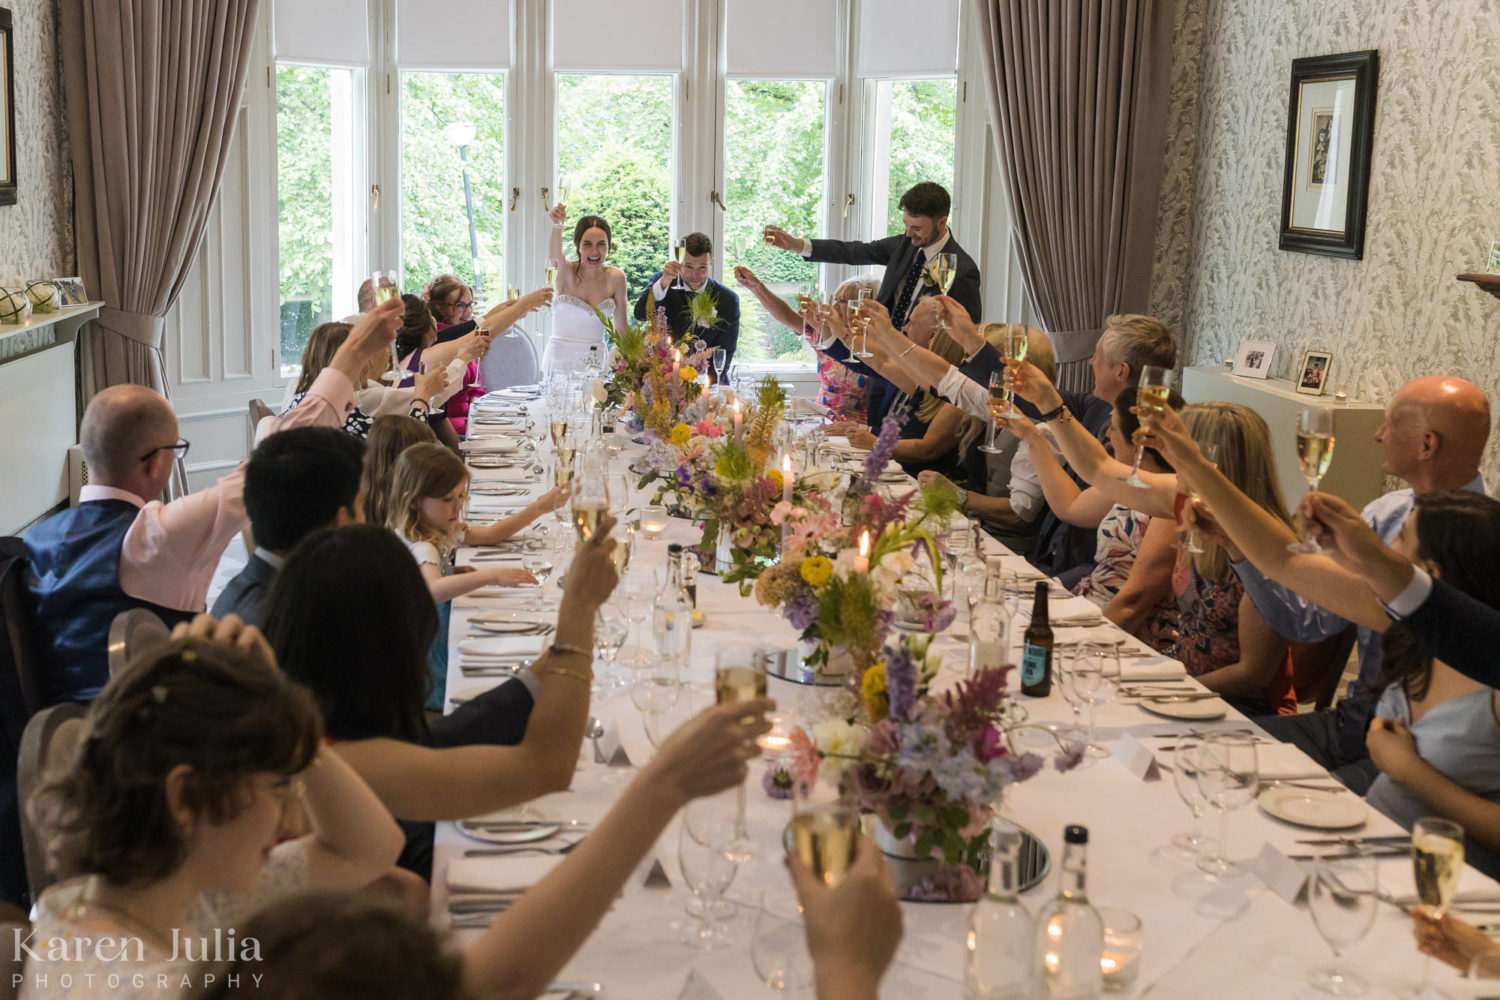 the couple and their guests raise glasses as a final toast